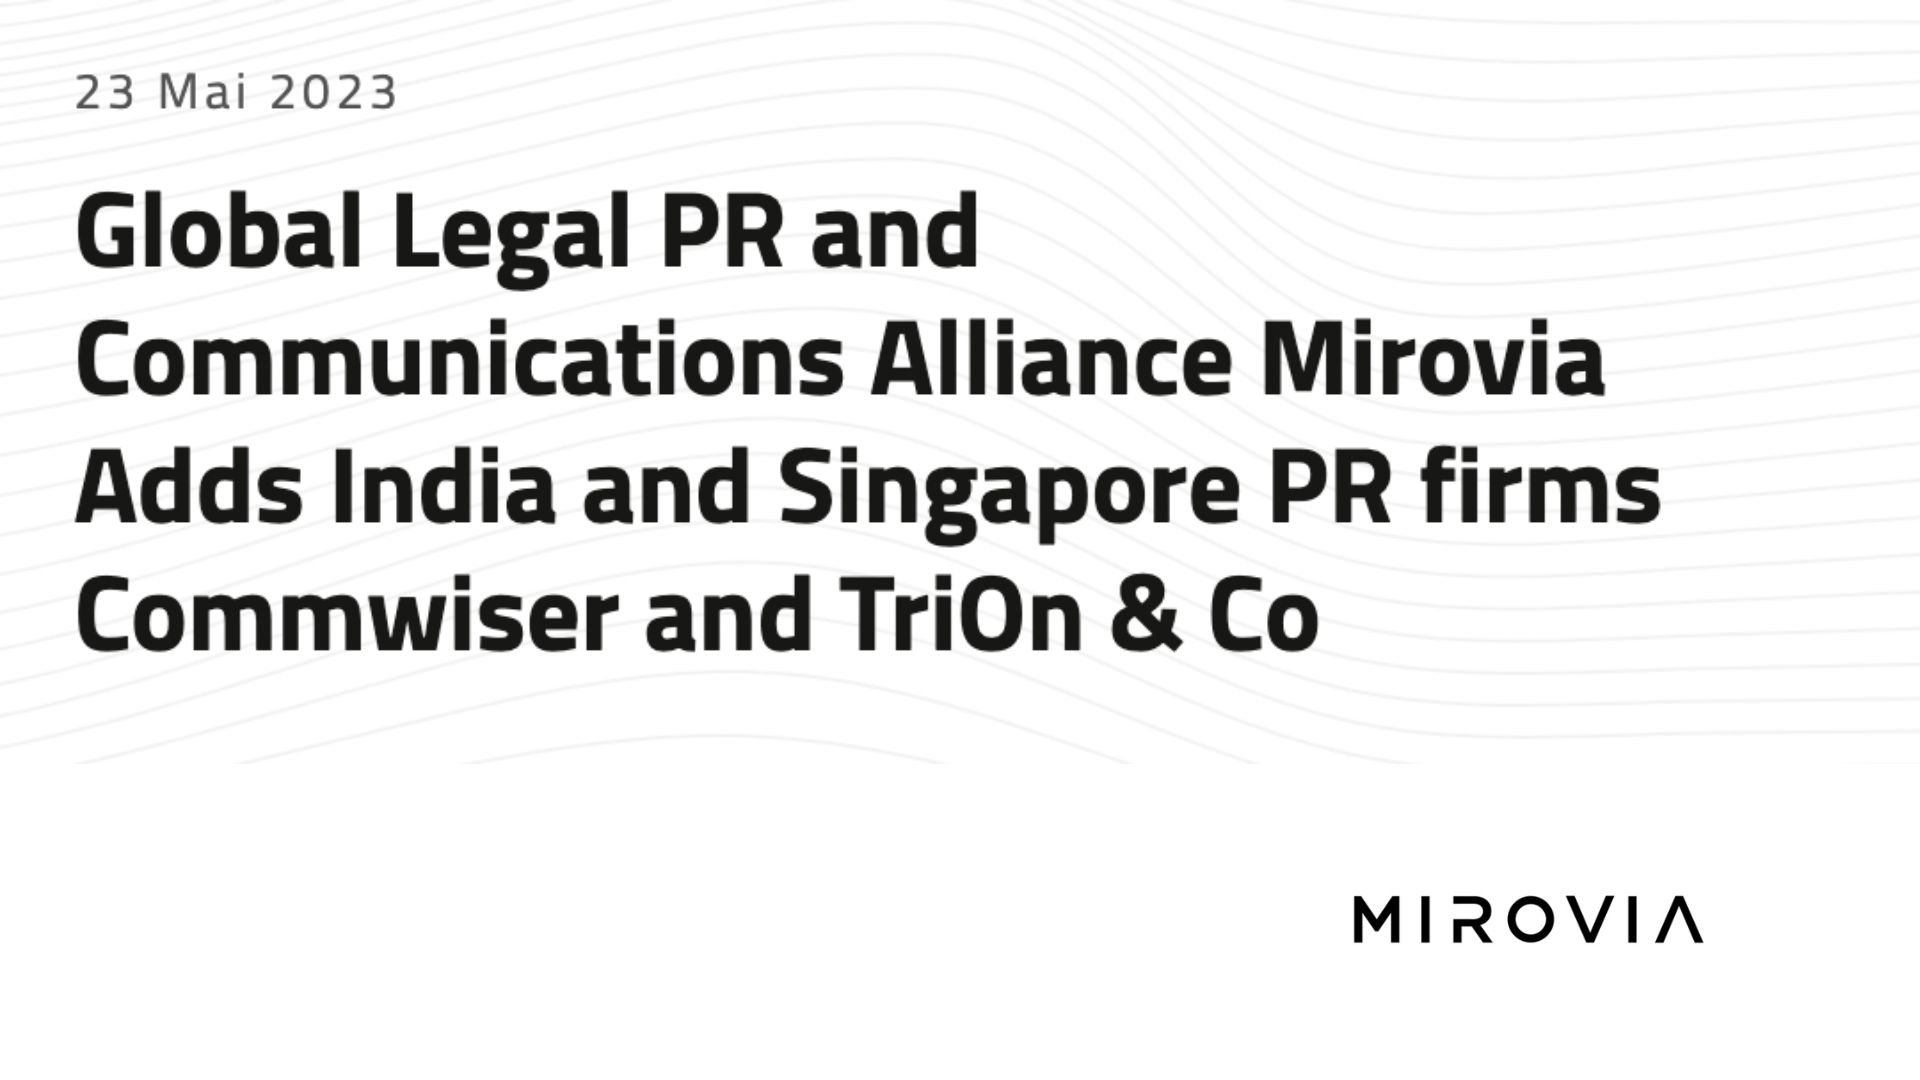 Global Legal PR and Communications Alliance Mirovia Adds India and Singapore PR firms Commwiser and TriOn & Co